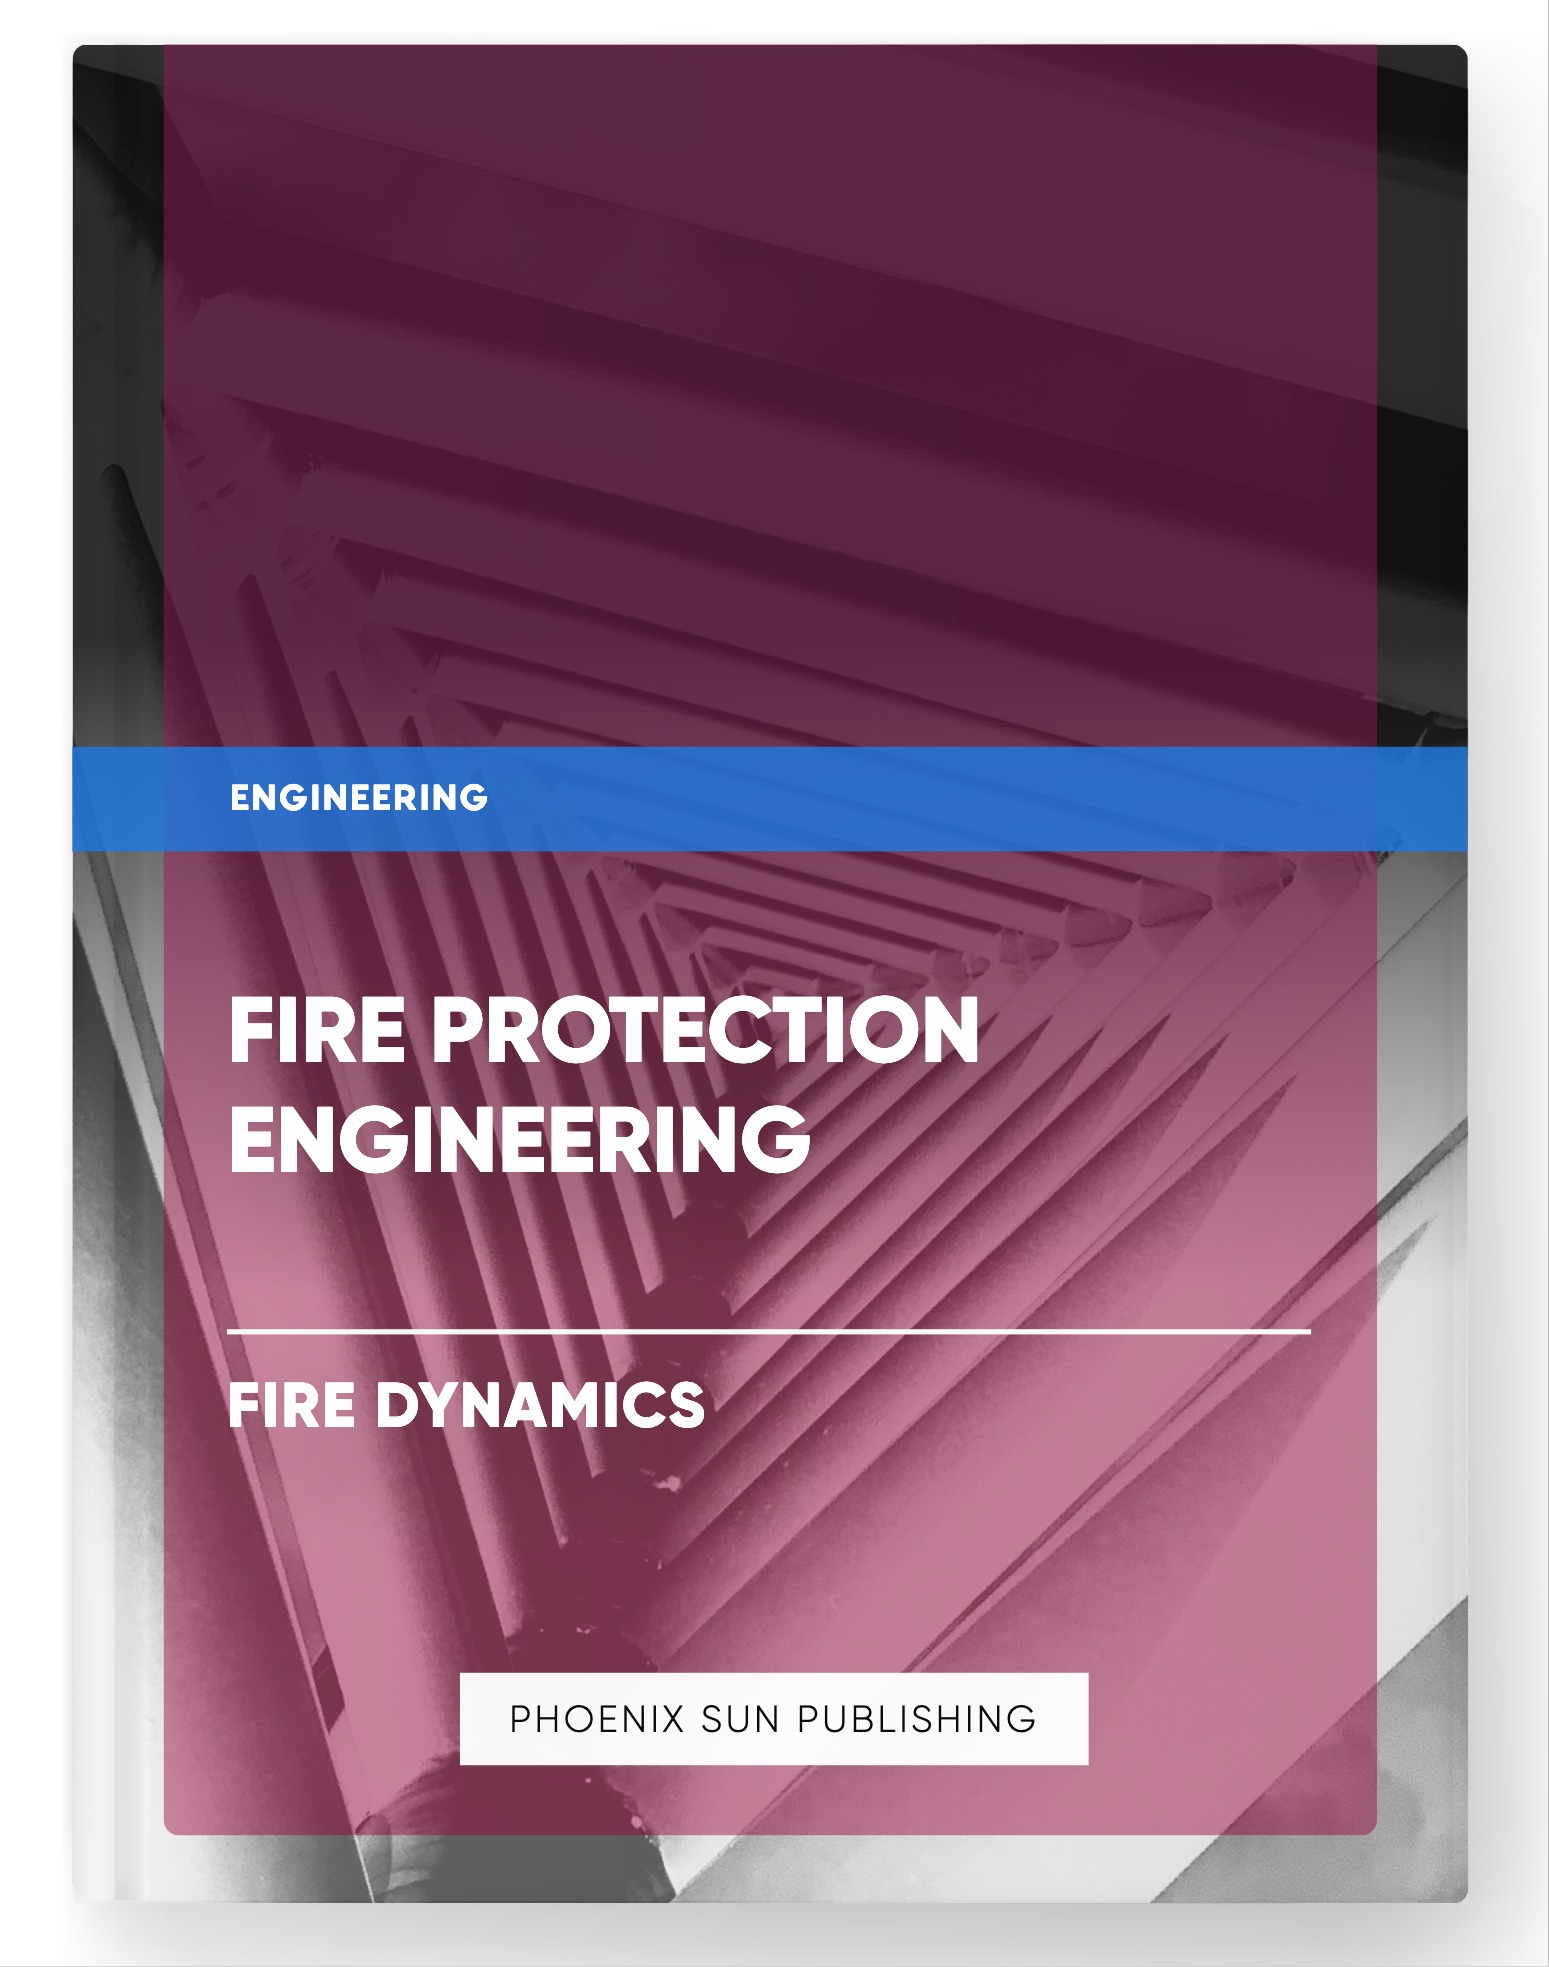 Fire Protection Engineering – Fire Dynamics